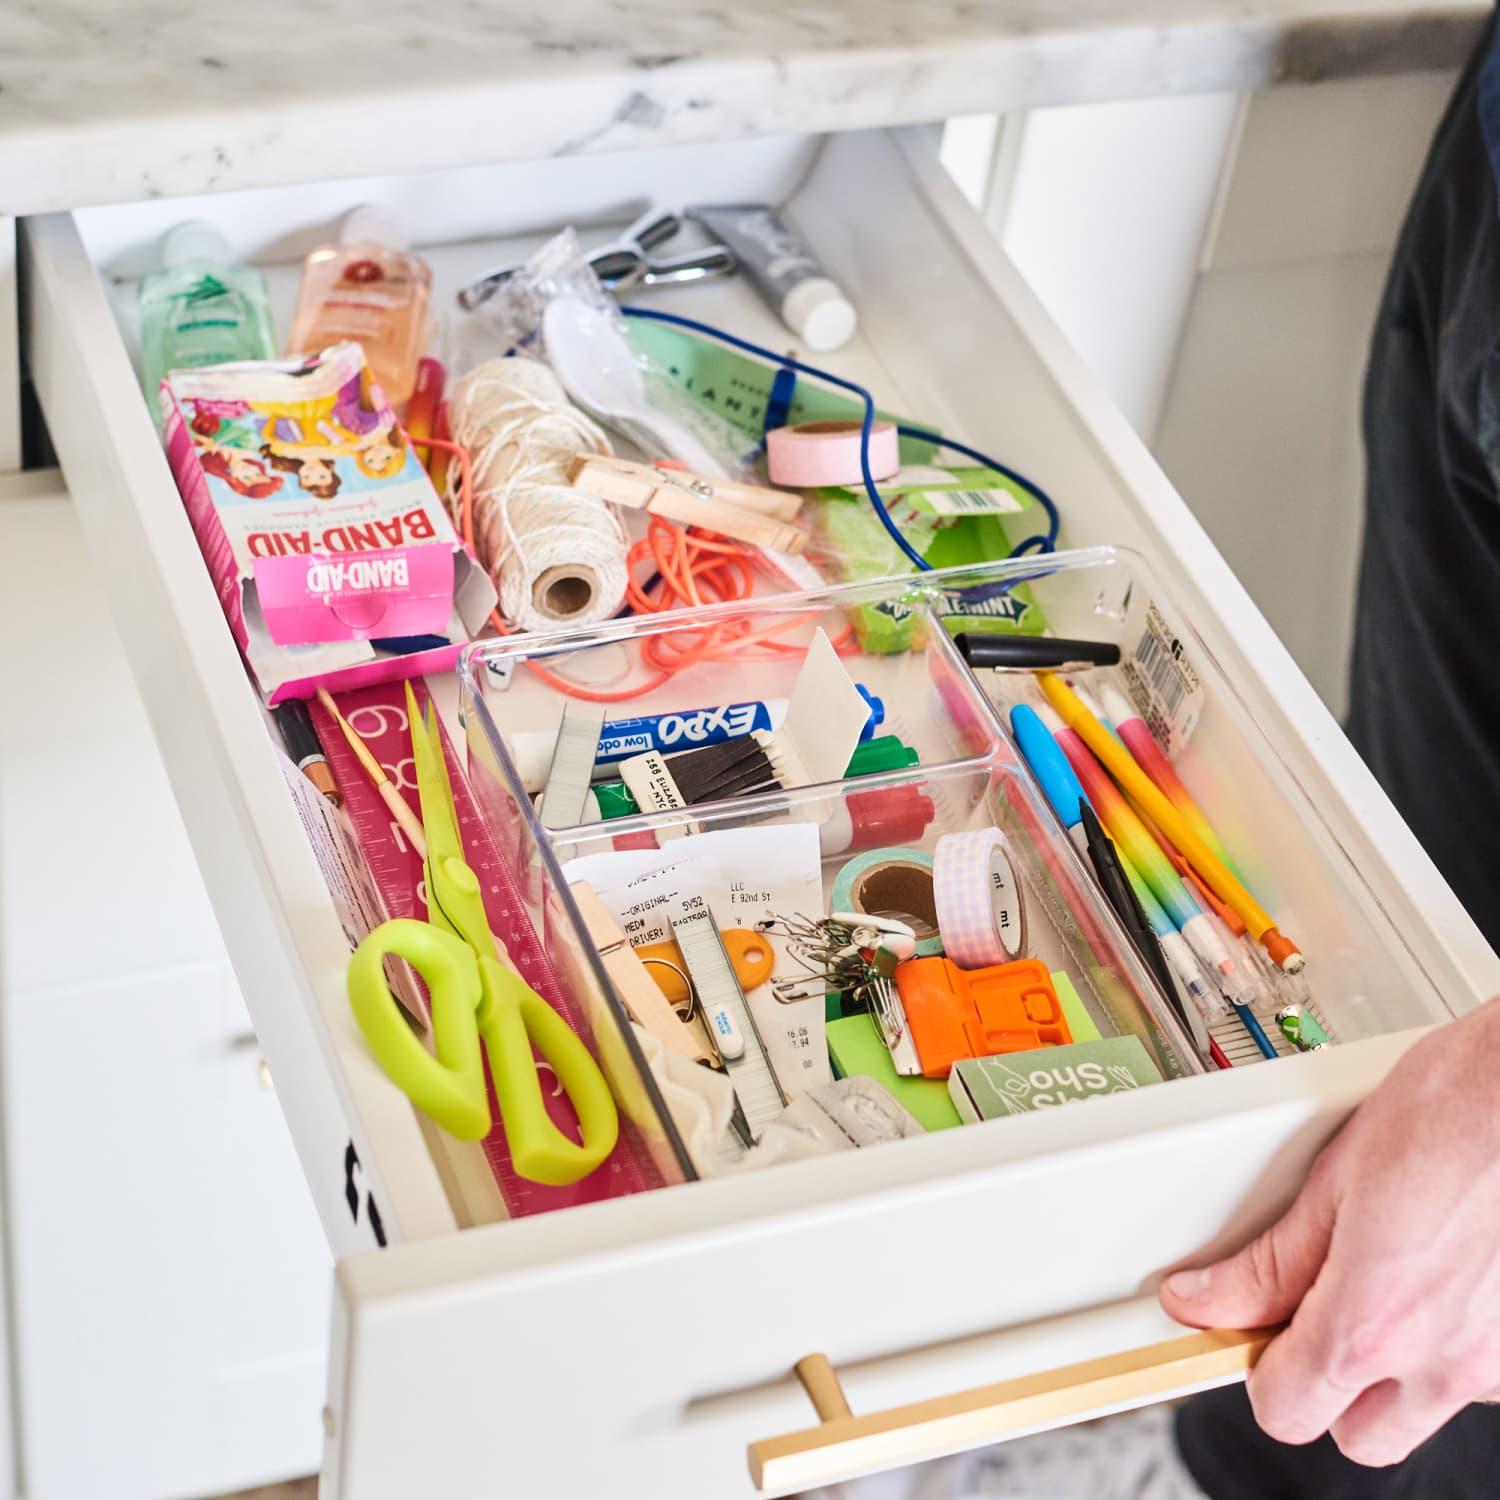 Junk drawers: a case of 'miscellaneous gone wrong'. 😆 When you really  break it down, most junk drawers are just in need of some serio